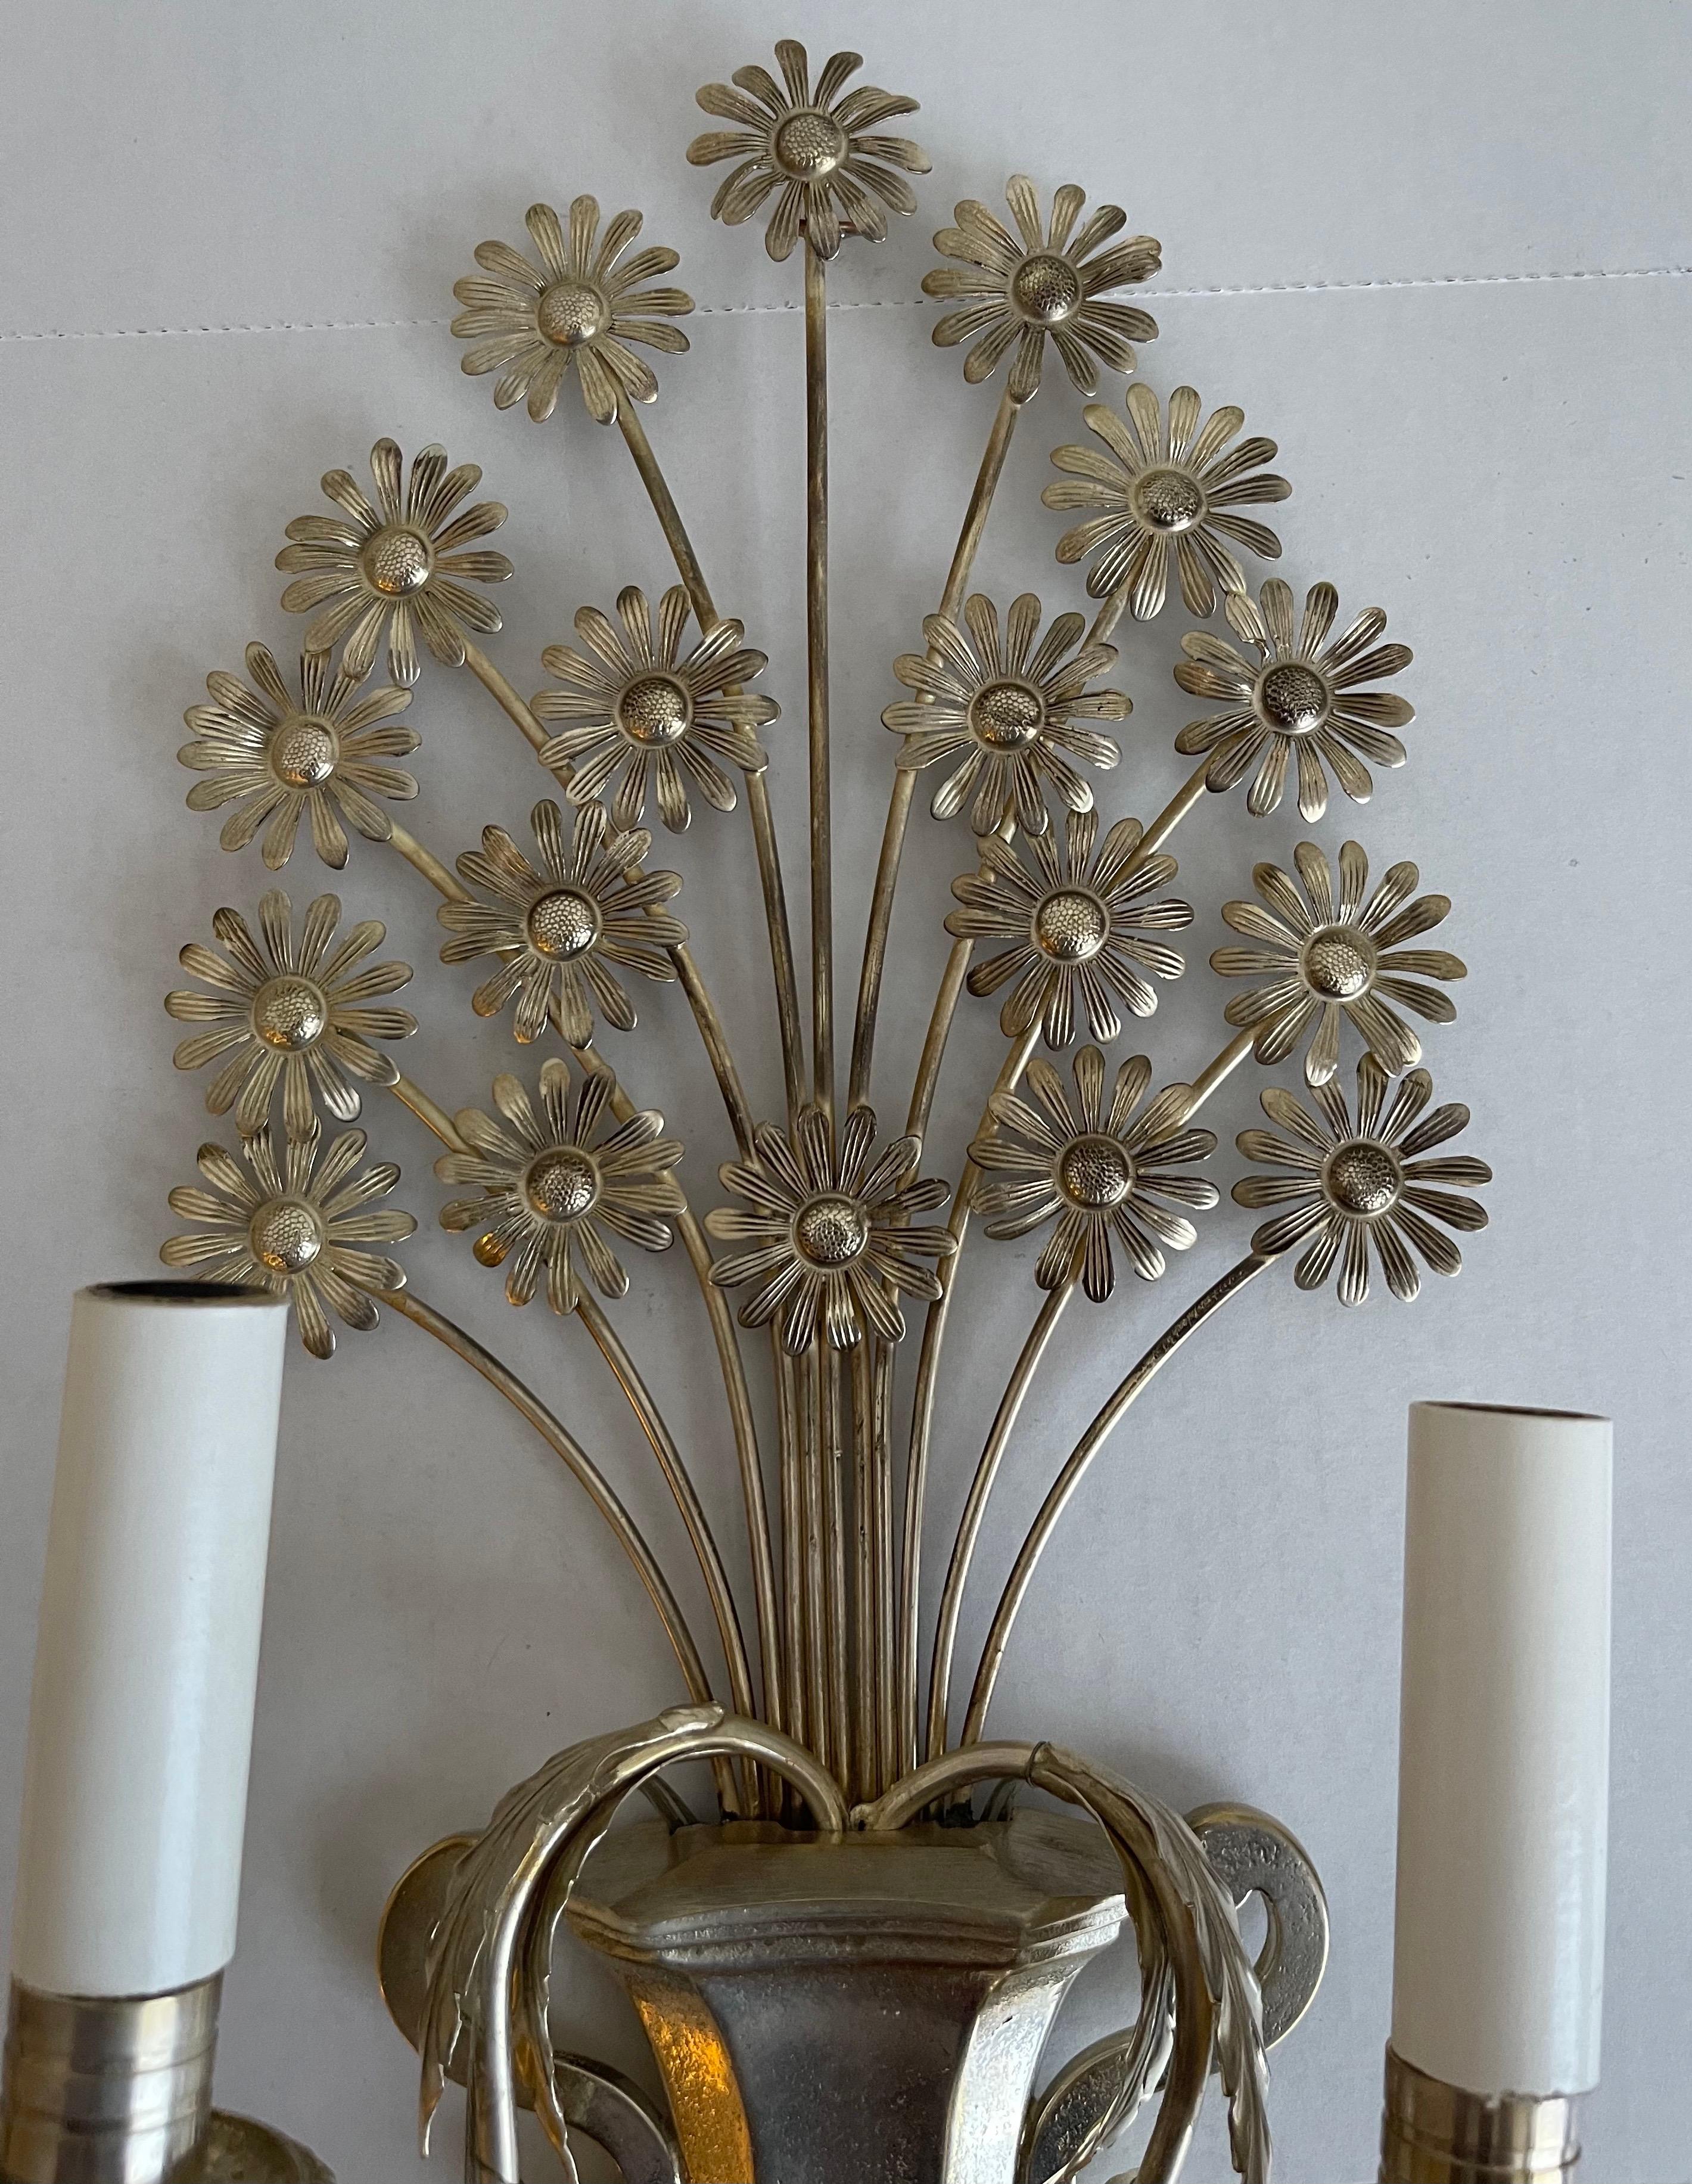 1950s French metal flower sconce. Newly silver plated and polished. Newly rewired. takes two chandelier bulbs (not included).
Please note that additional components such as back plates may be required for installation and are not included with the